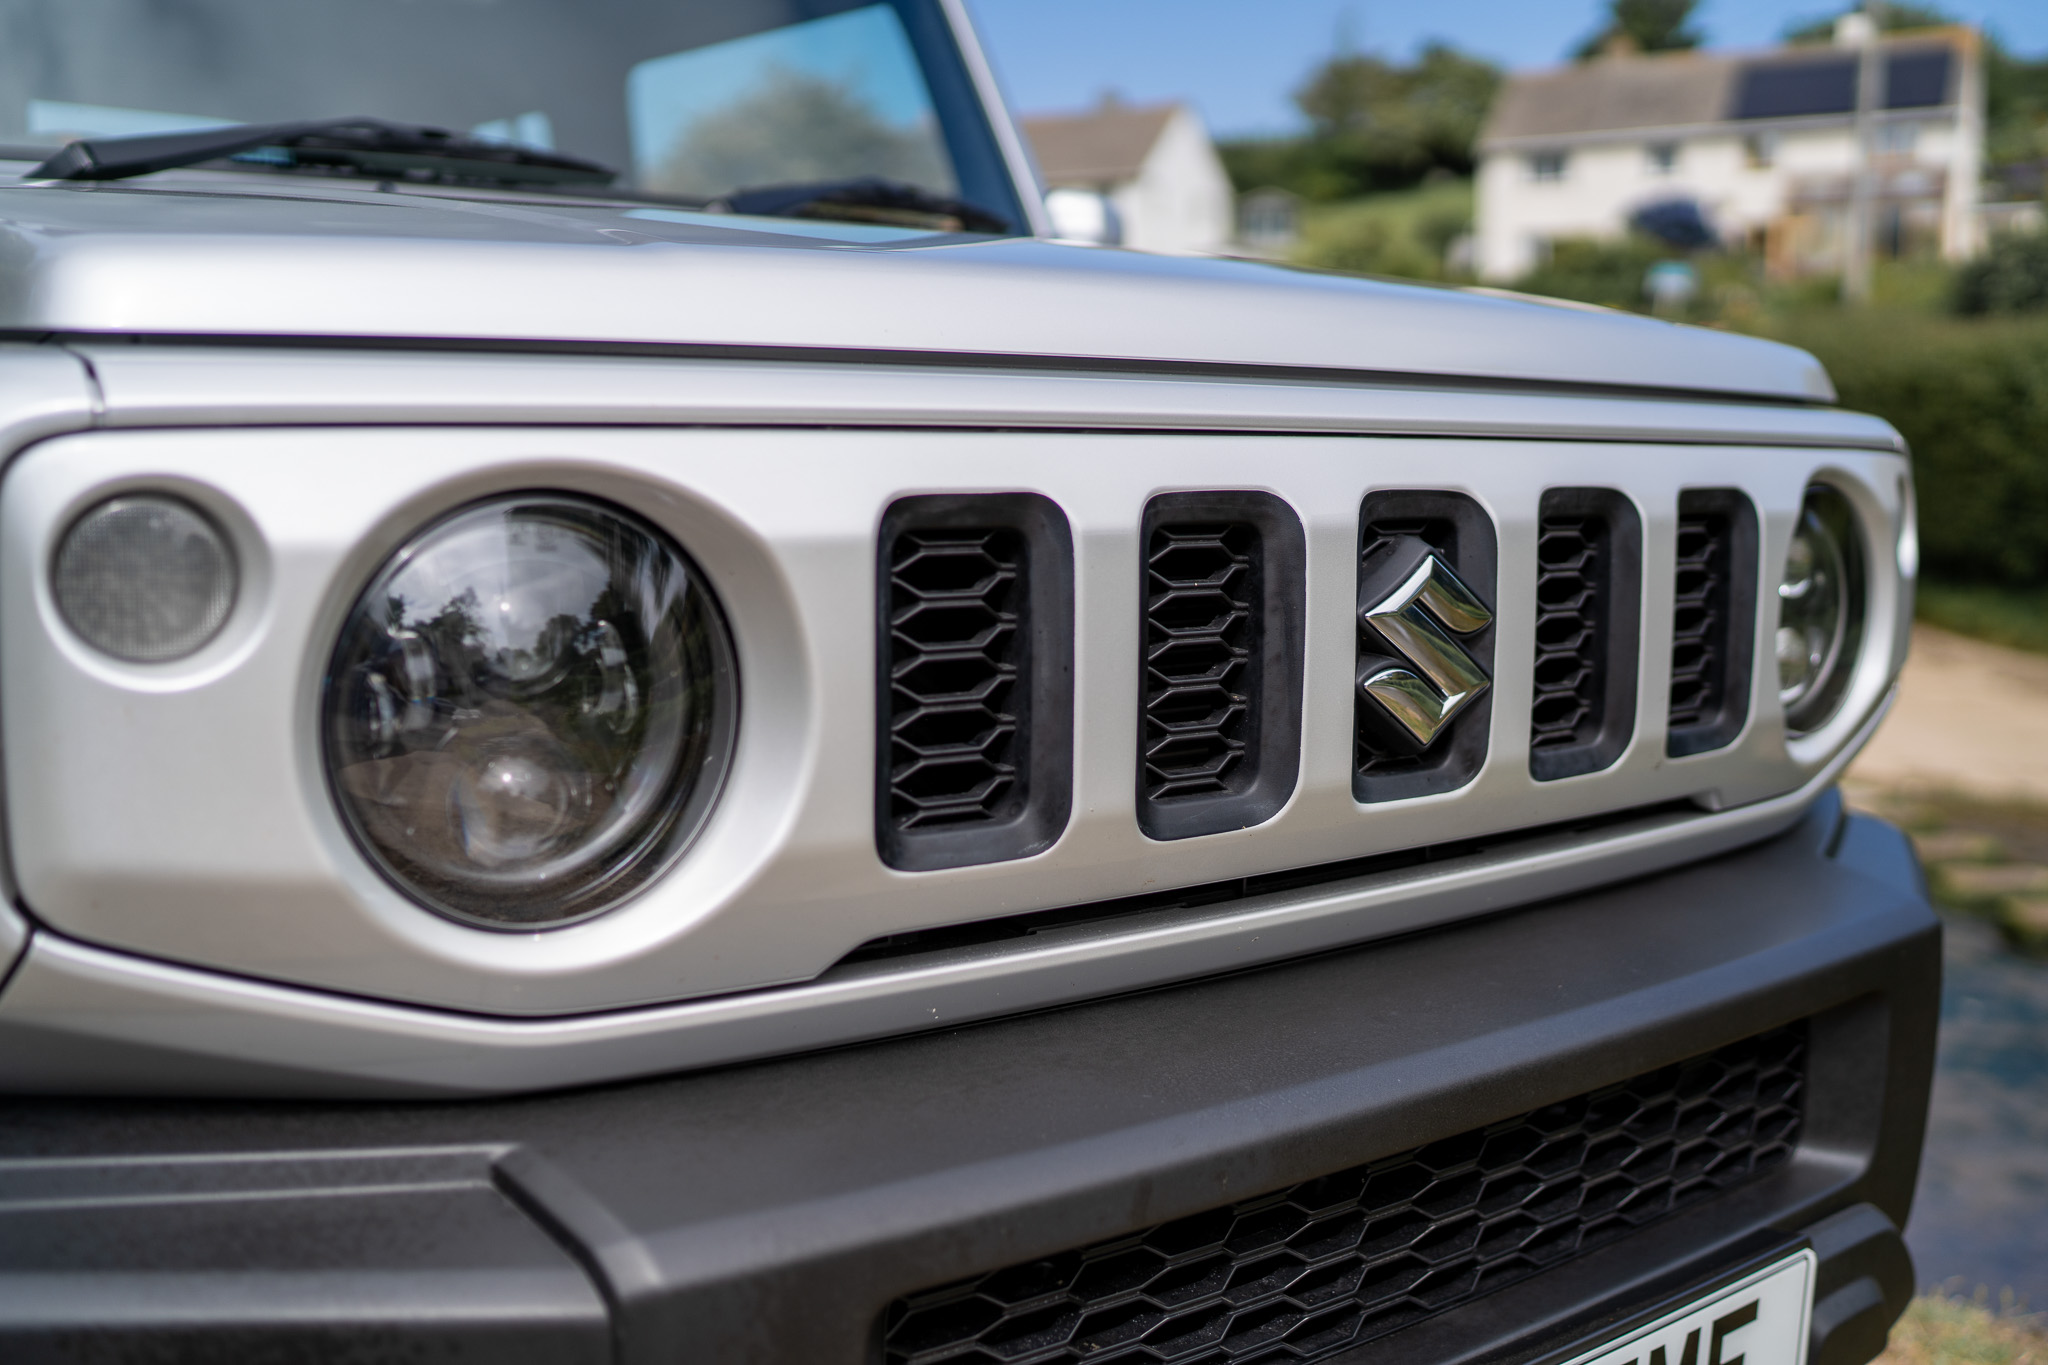 Suzuki Jimny by Twisted review: Meet the £50,000, 163bhp